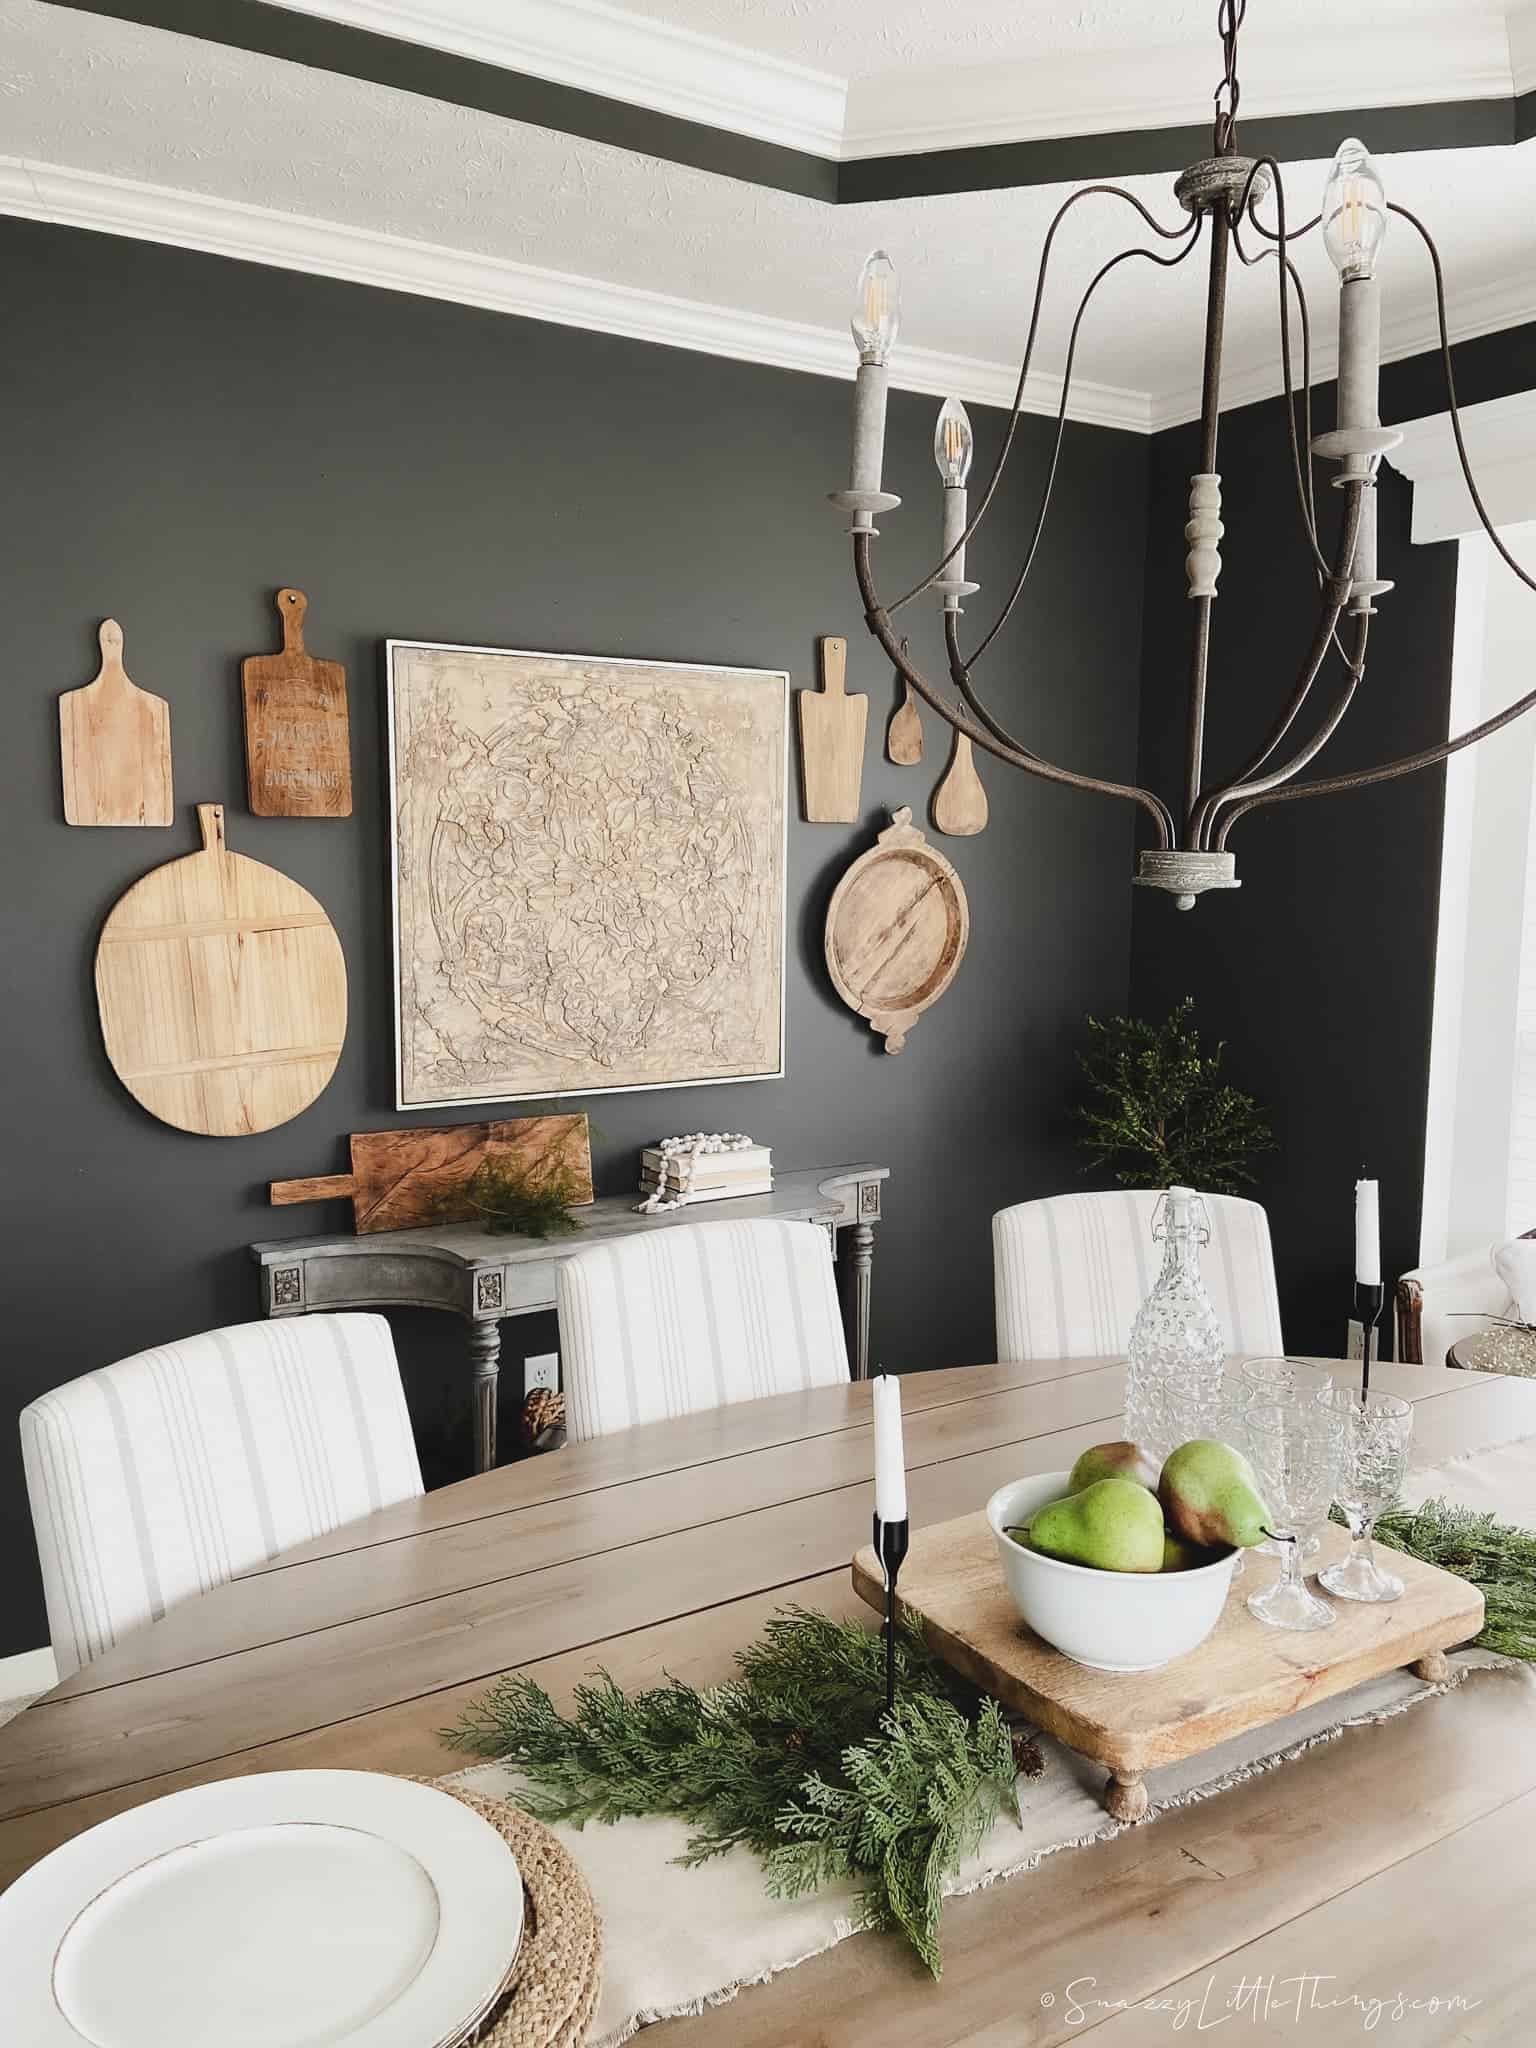 https://www.snazzylittlethings.com/wp-content/uploads/Gallery-Wall-with-Cutting-Boards-in-Formal-Dining-Room-with-Rustic-Elements.jpg